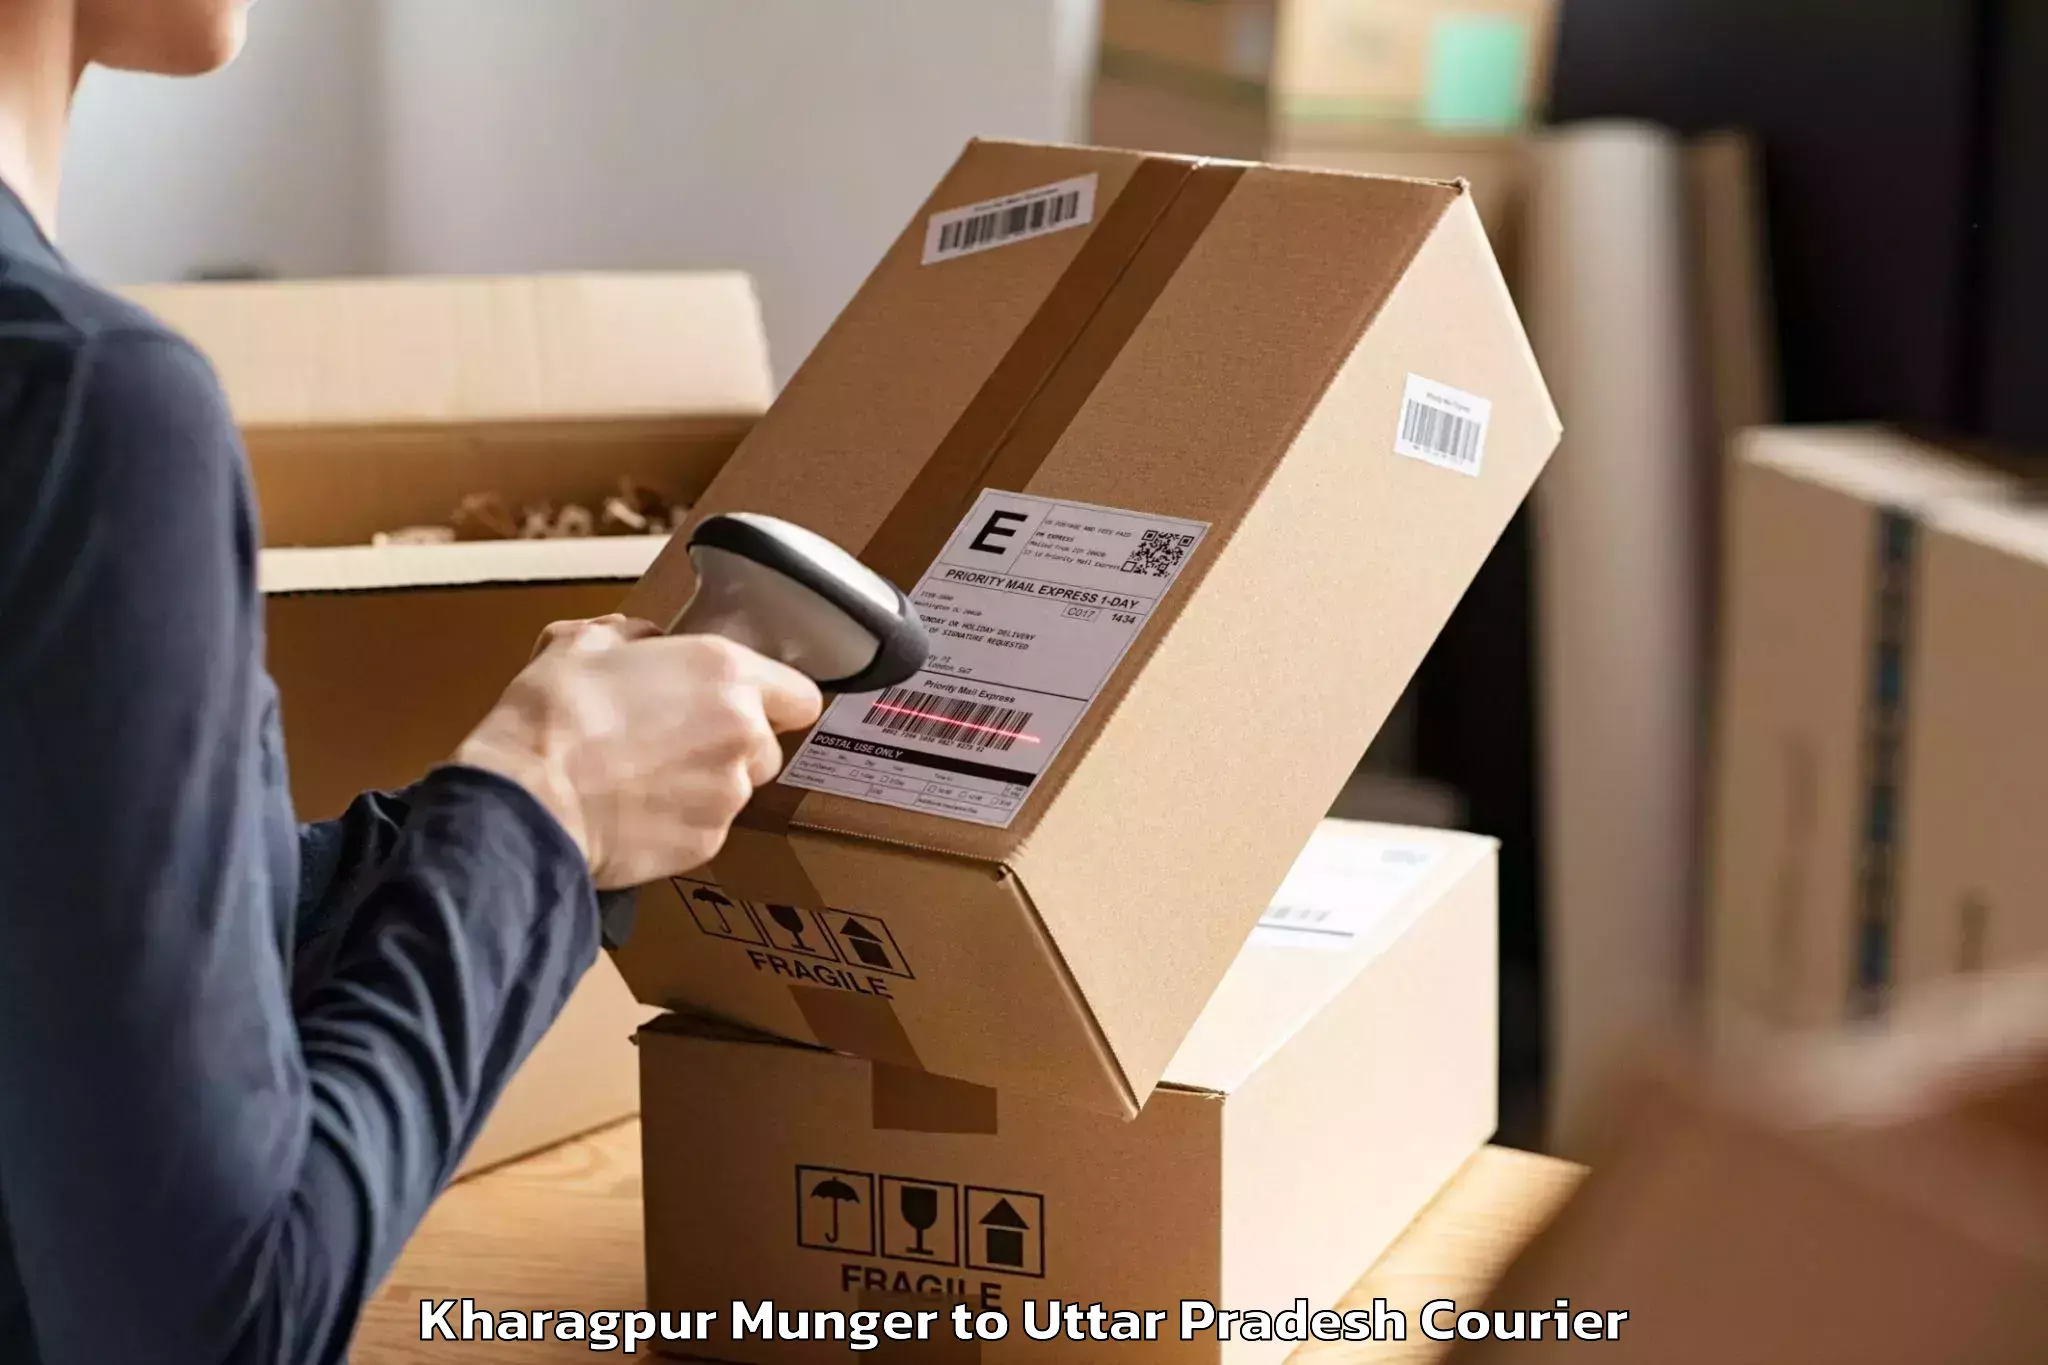 Quality moving company in Kharagpur Munger to Fatehabad Agra